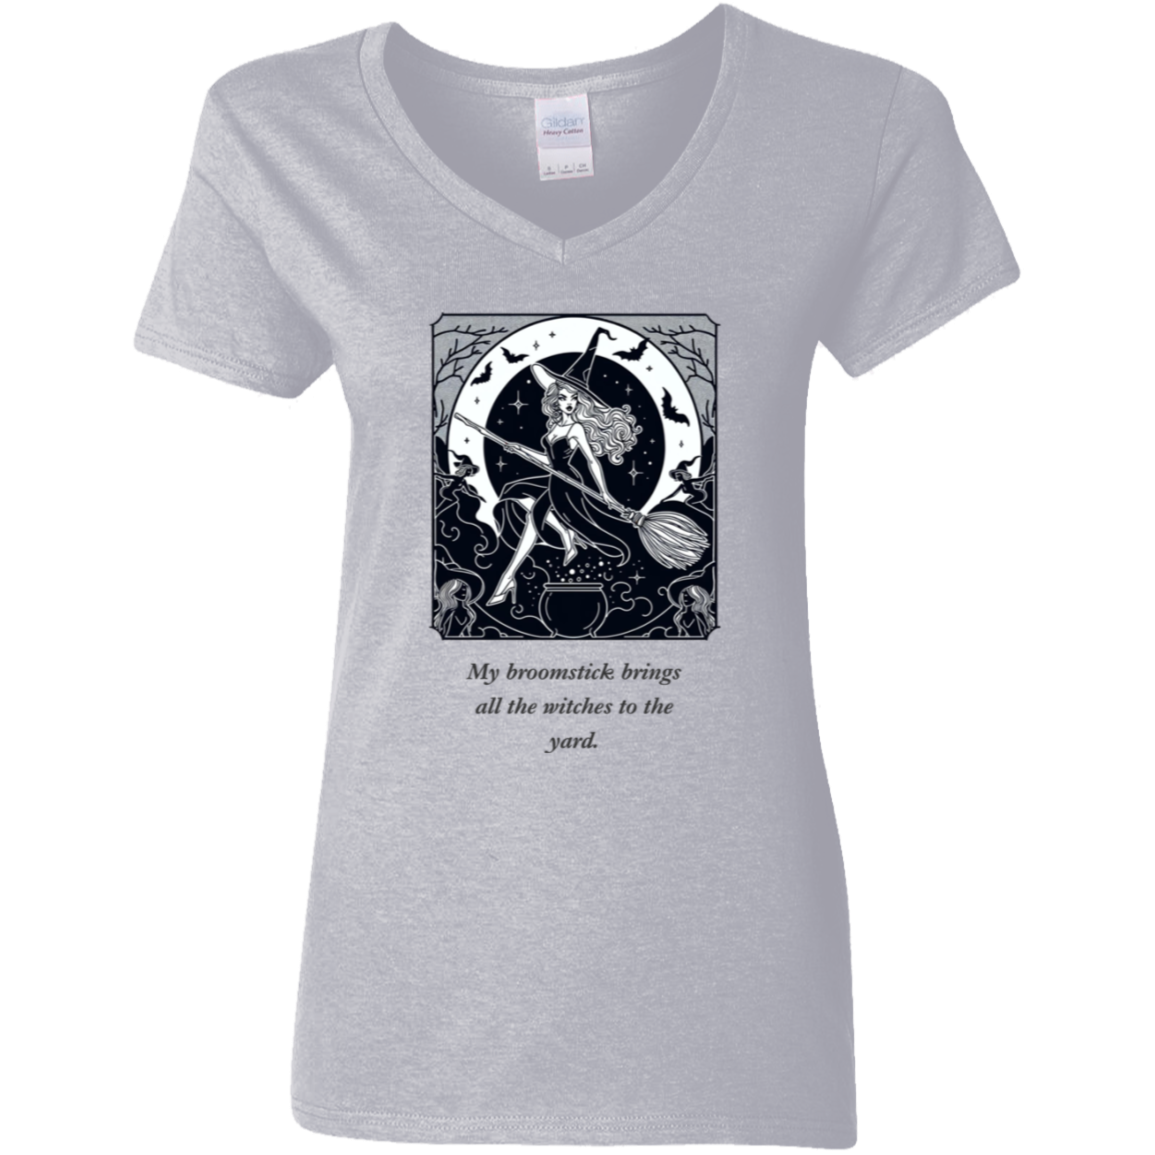 My Broomstick Brings All the Witches to the Yard - Women's Sassy T-Shirt